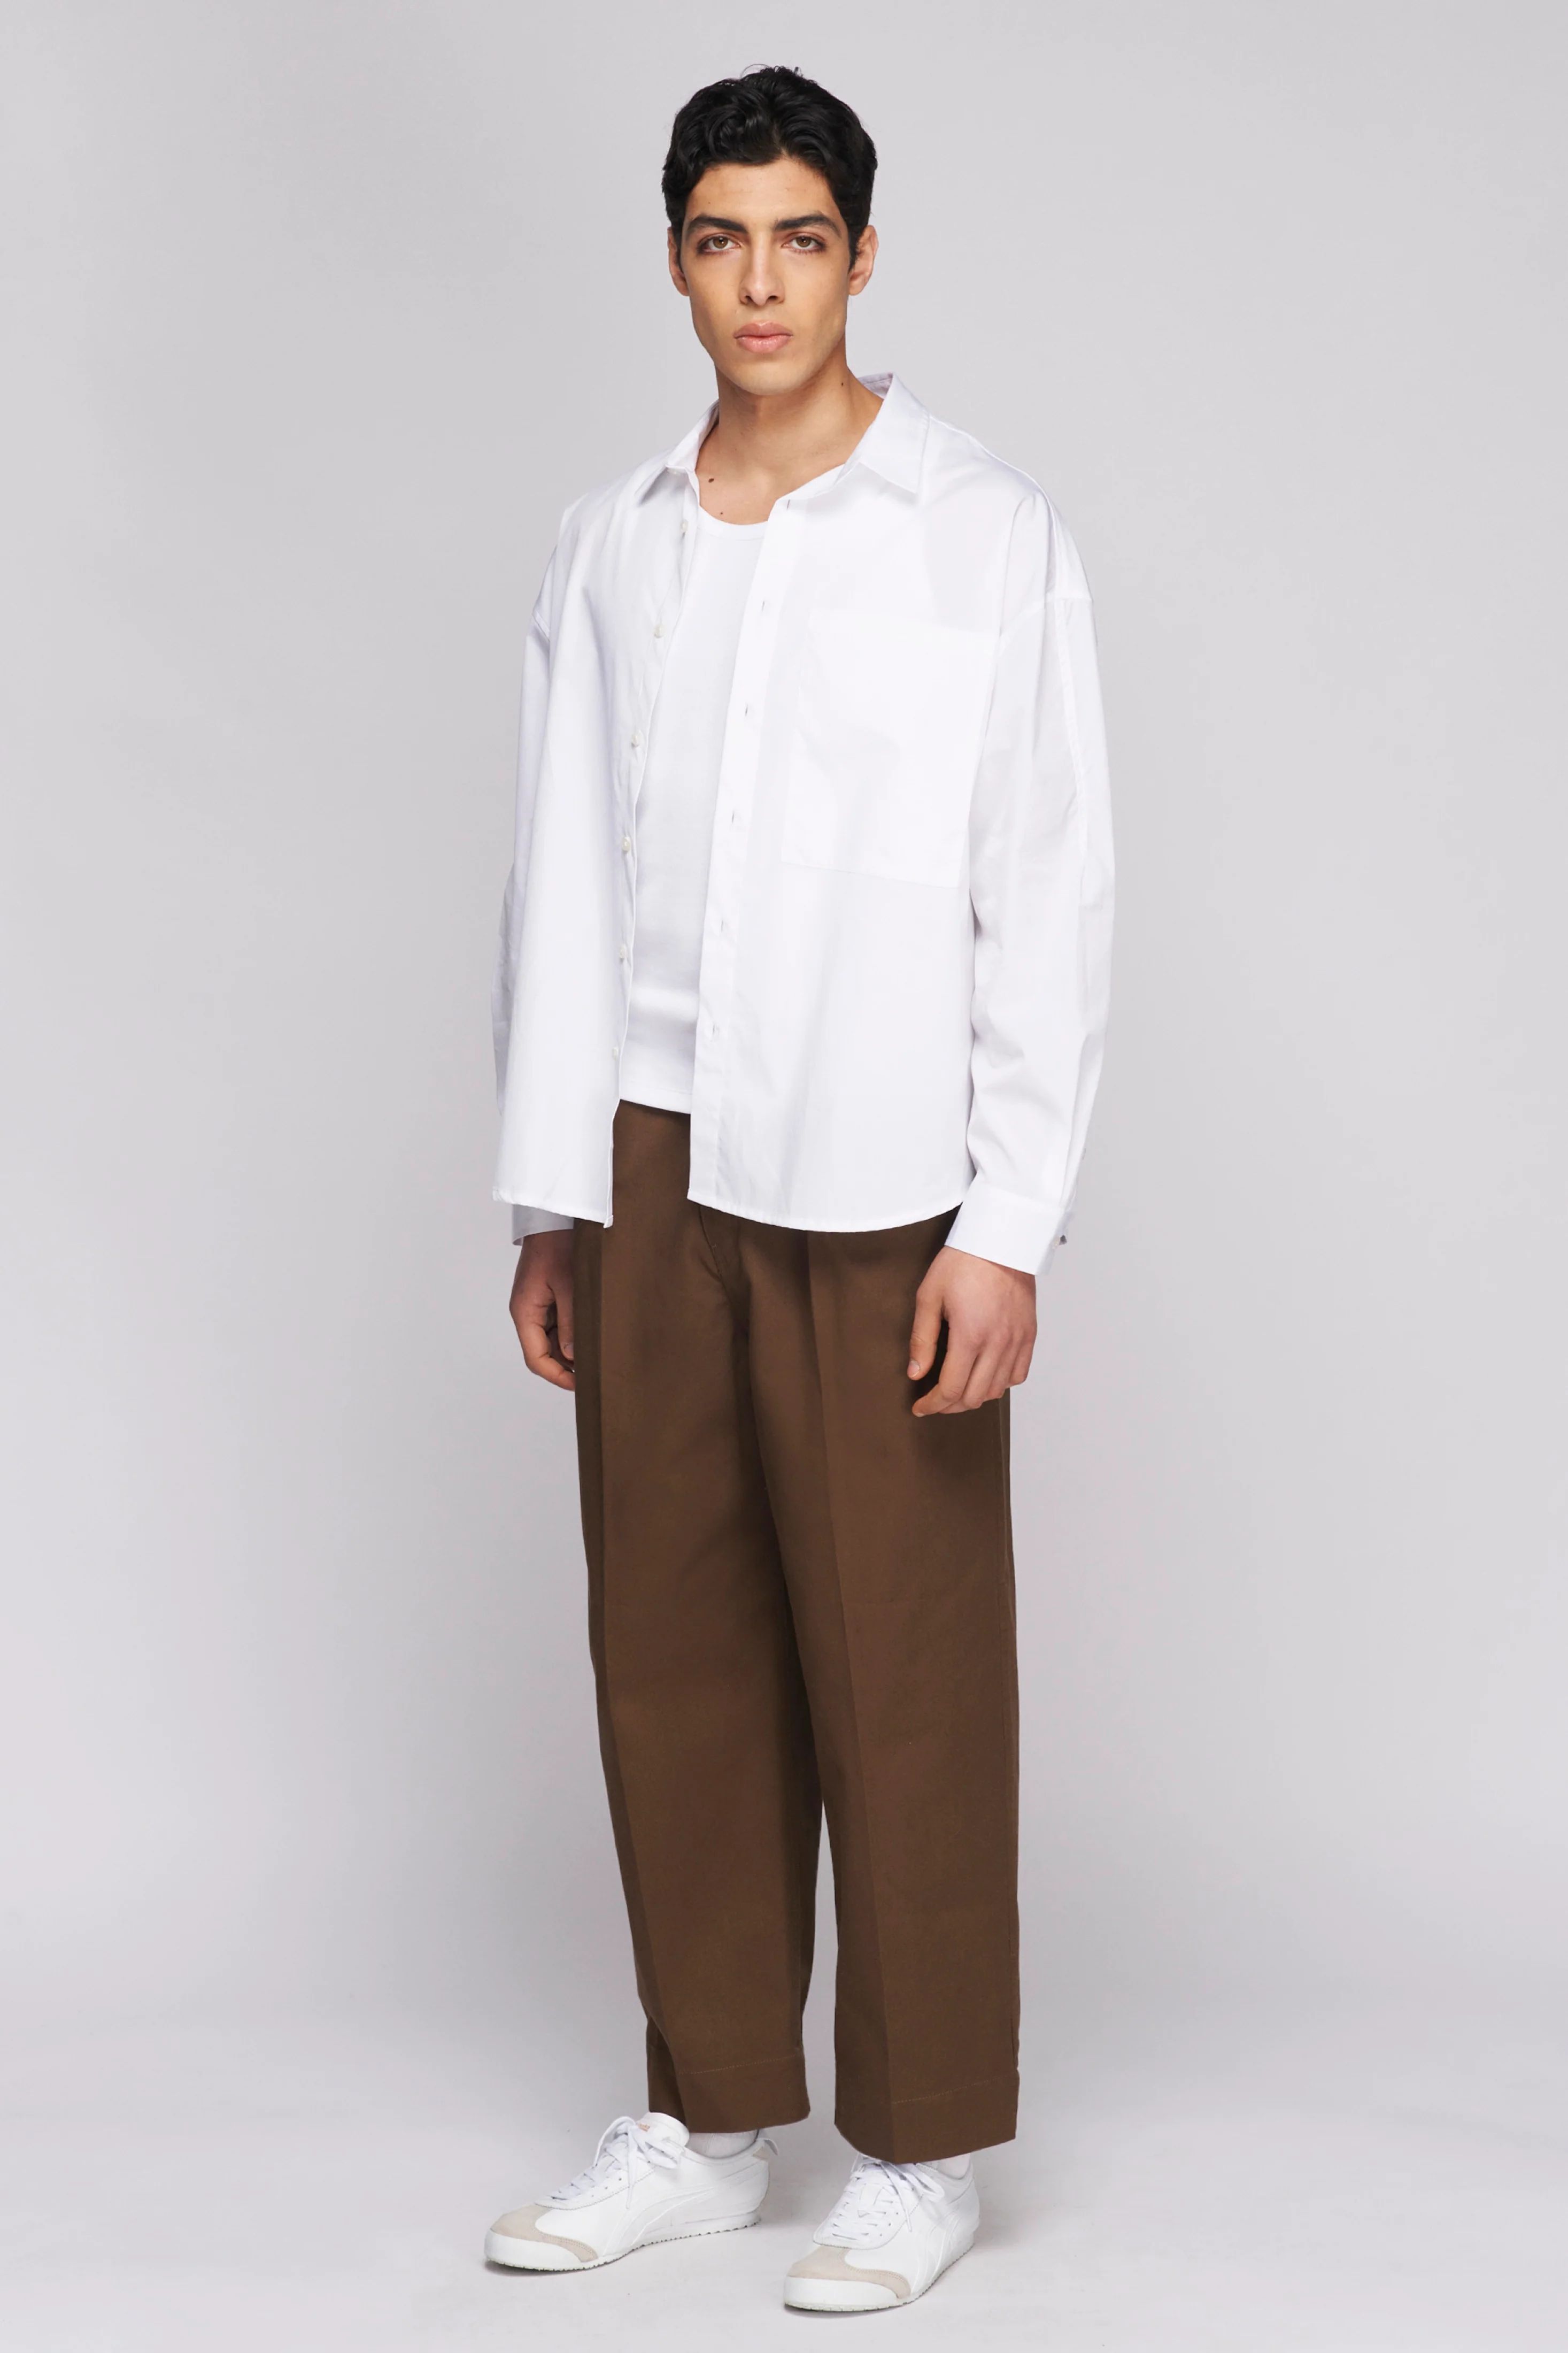 Unisex Boxy Poplin Shirt$1285.0/5 All reviewsShow reviews draweror 4 payments of $32 with Sezzle ... | Kotn